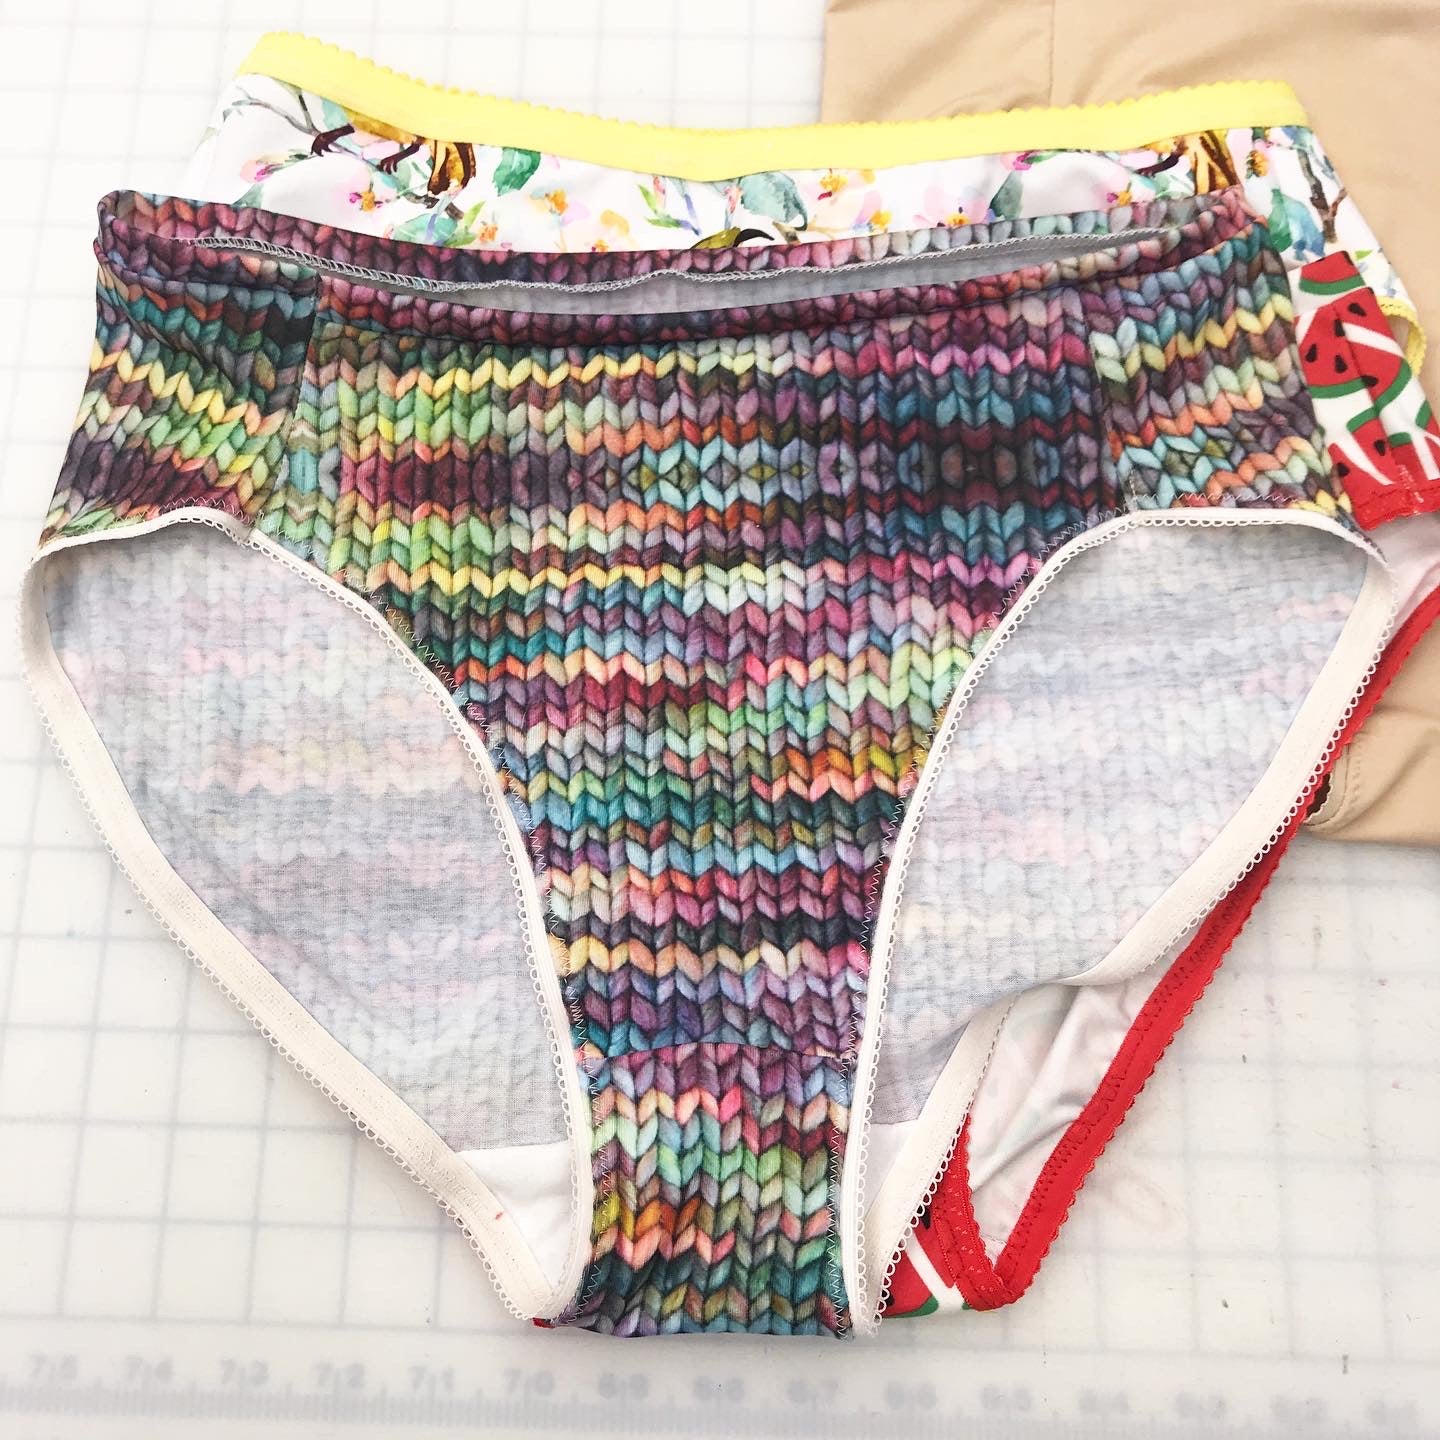 Ladies Knitted Underwear patterns available from